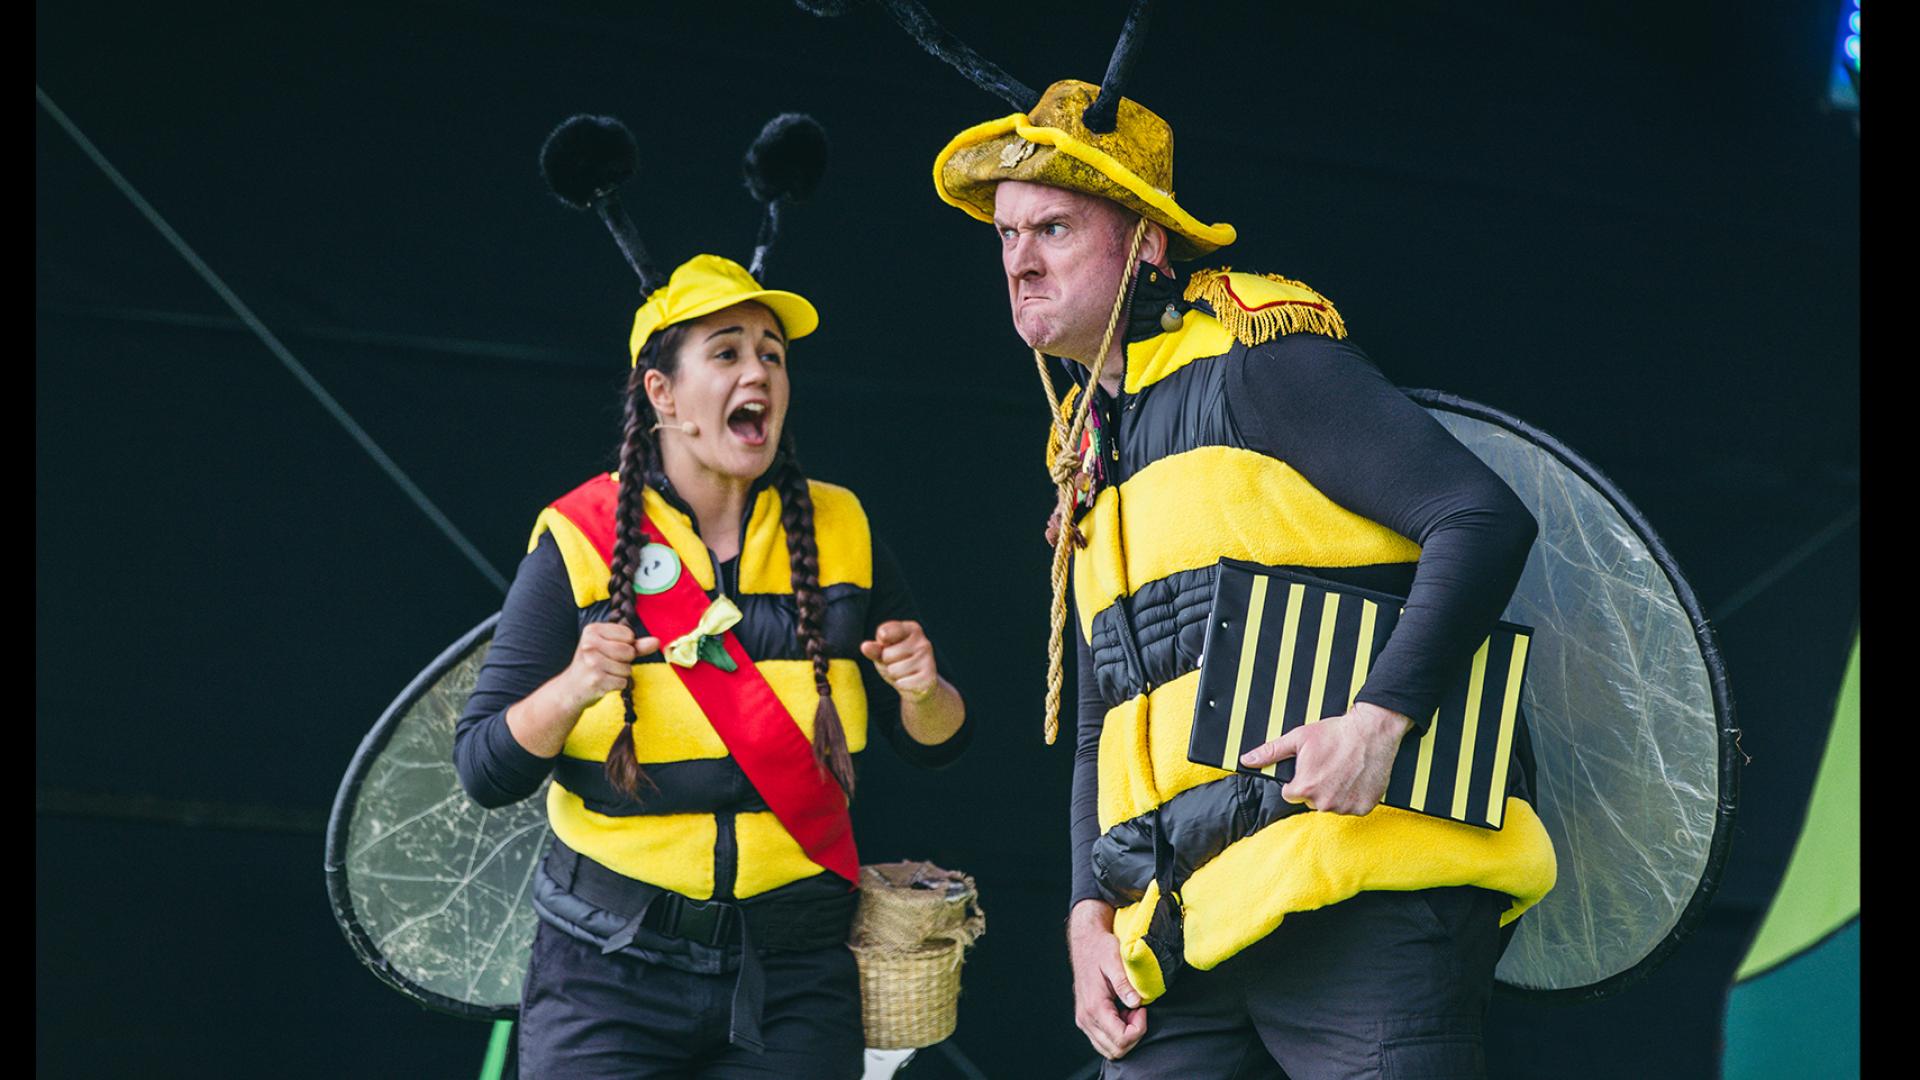 Two people dressed as bees